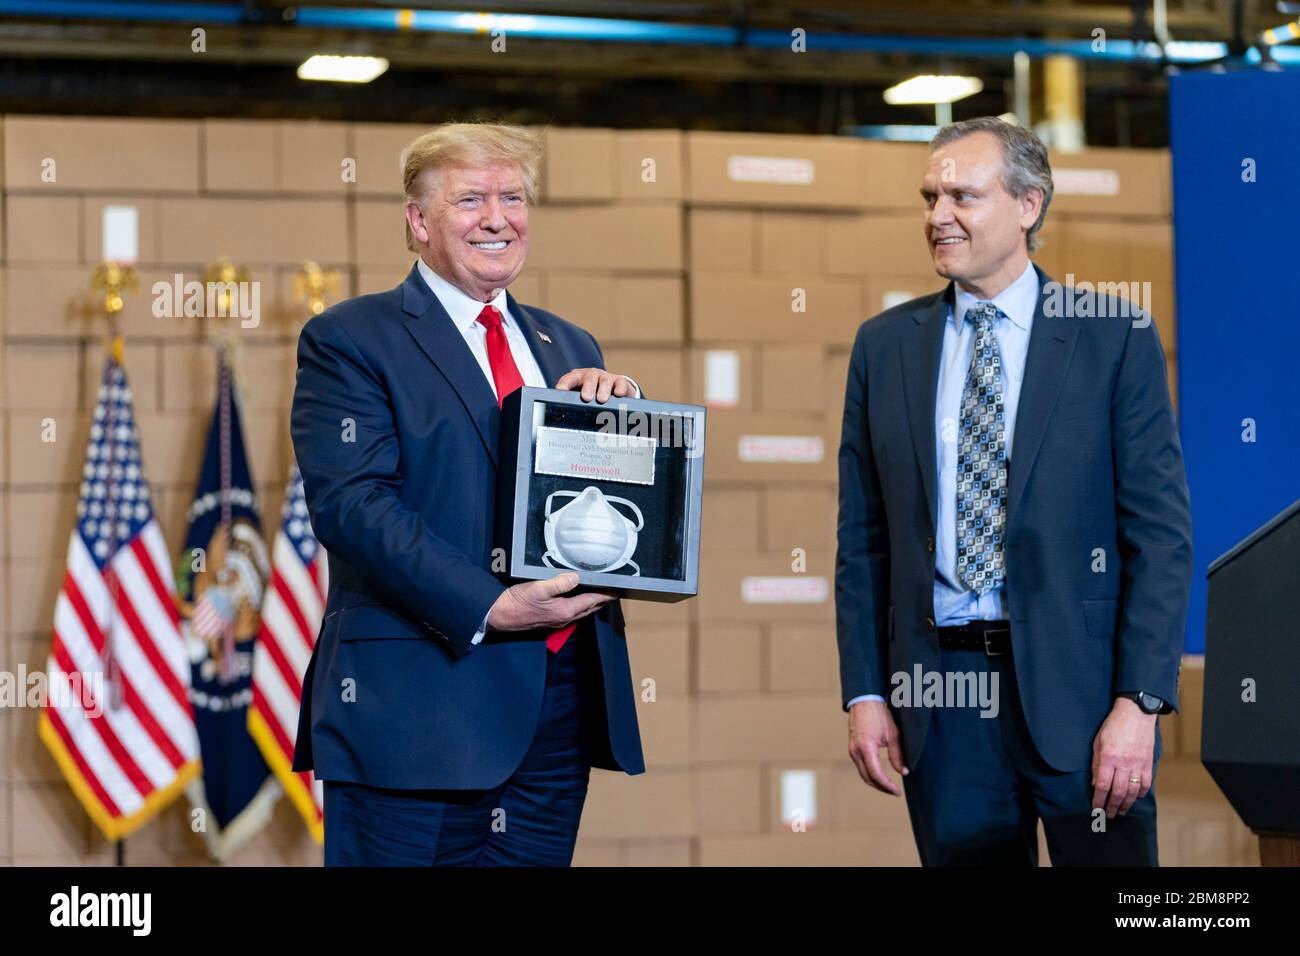 Honeywell CEO Darius Adamczyk presents President Donald Trump with a framed N95 mask after a tour of the mask production assembly line at Honeywell International May 5, 2020 in Phoenix, Arizona. Stock Photo